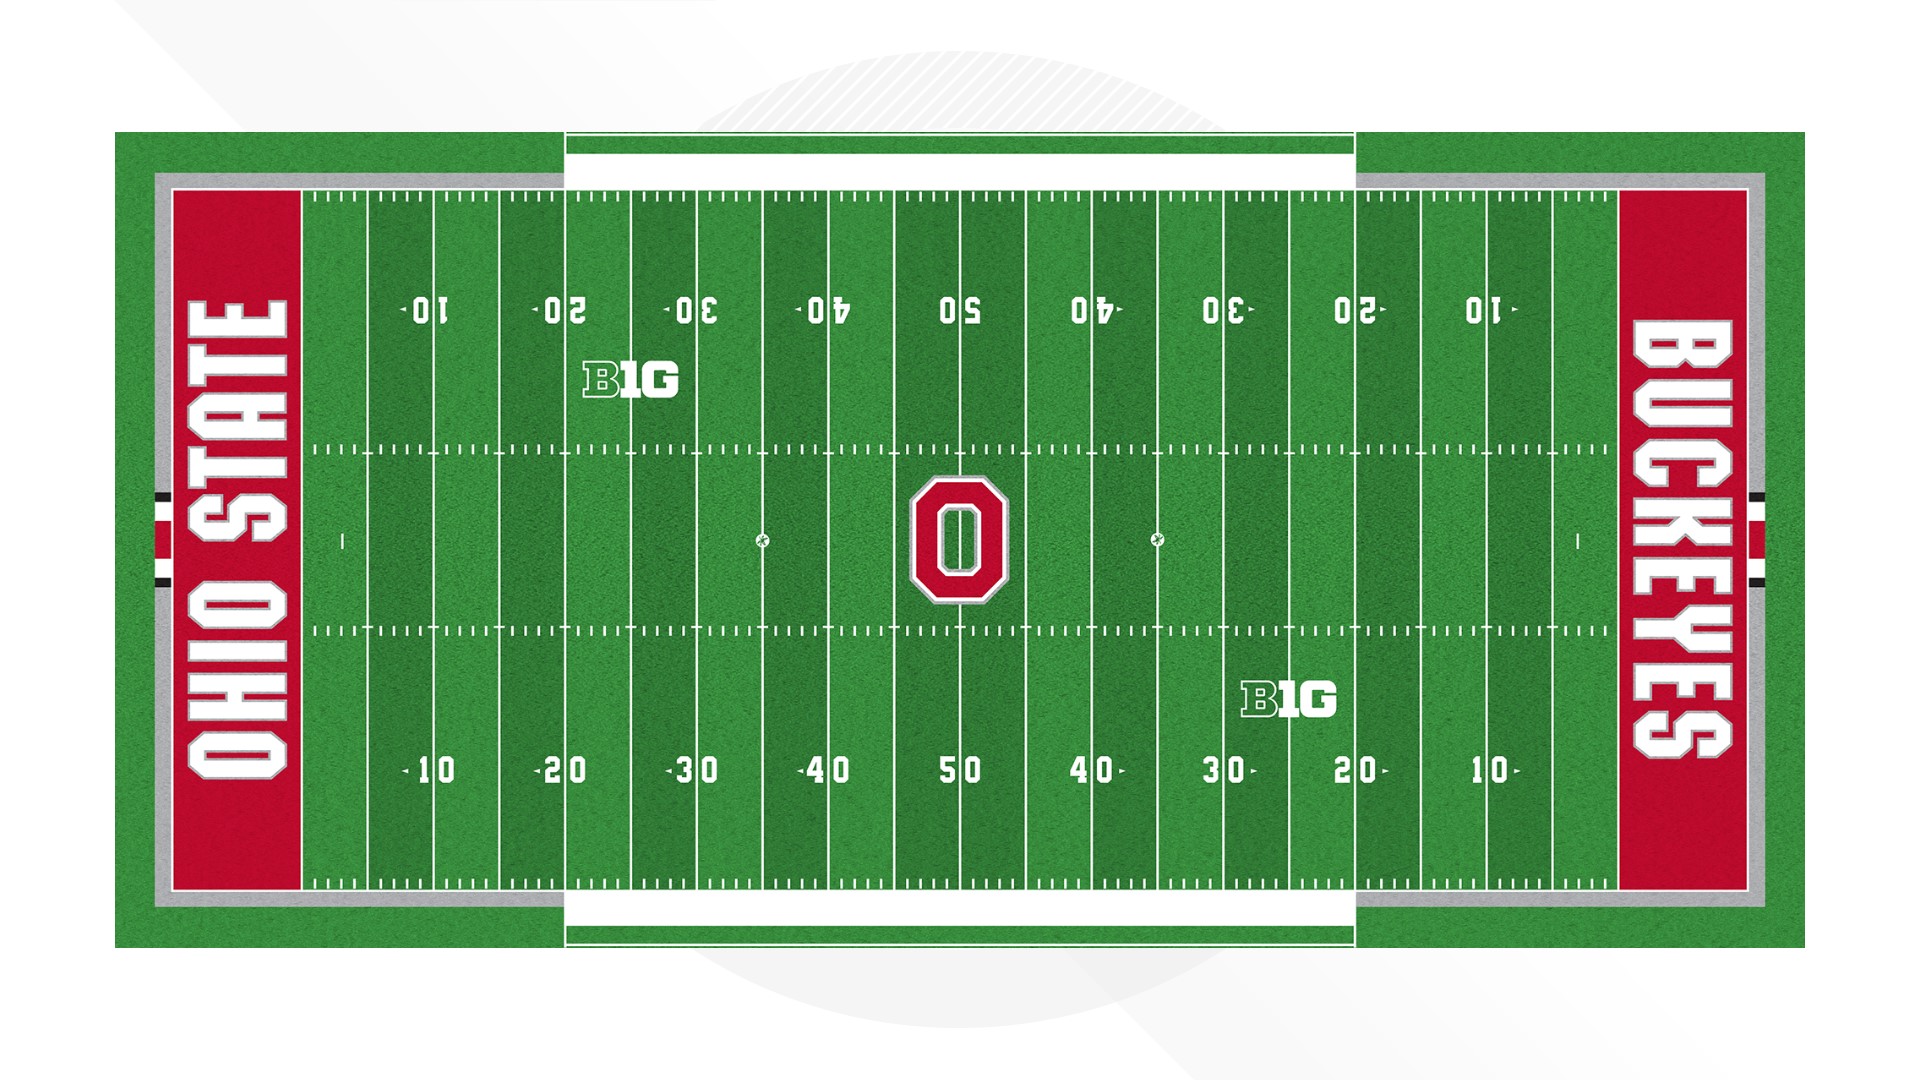 The new turf will be installed this summer ahead of the 2022 season.